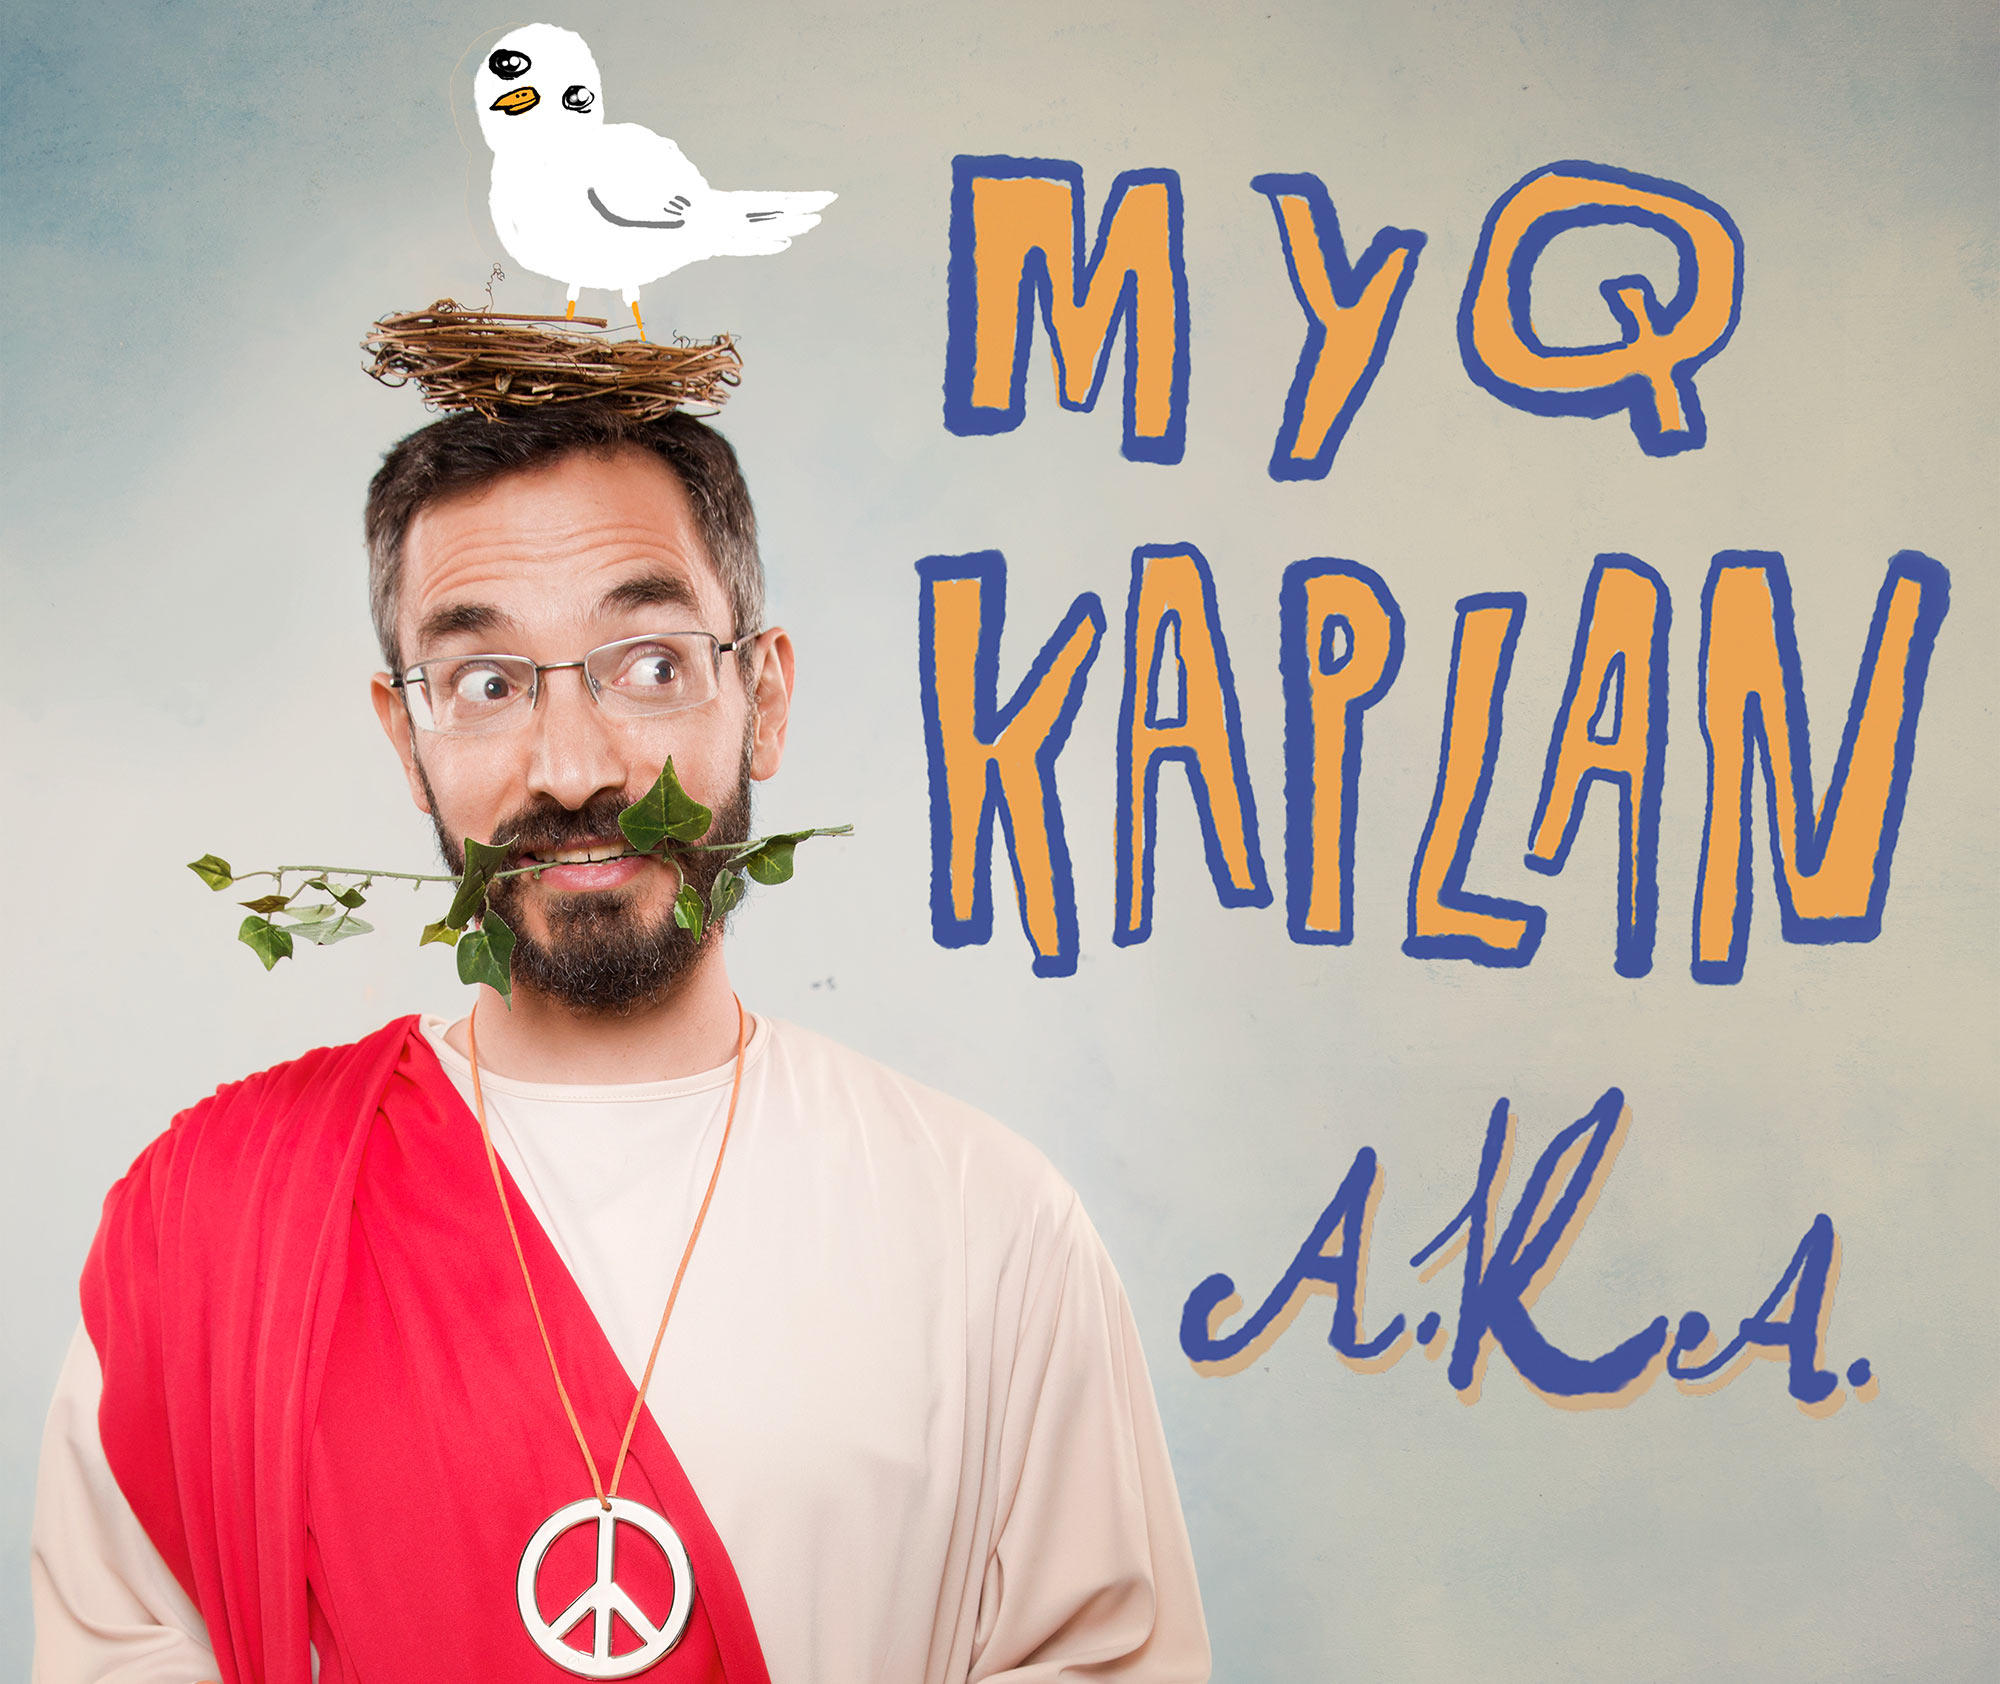 Album cover for stand-up comic's Myq Kaplan (GRS’09 album “A.K.A”. Kaplan wears a red sash, an illustrated bird sits on a nest on top of his head. The words "MYQ AKA" are seen drawn to the right. Illustration image courtesy of Shark Party Media